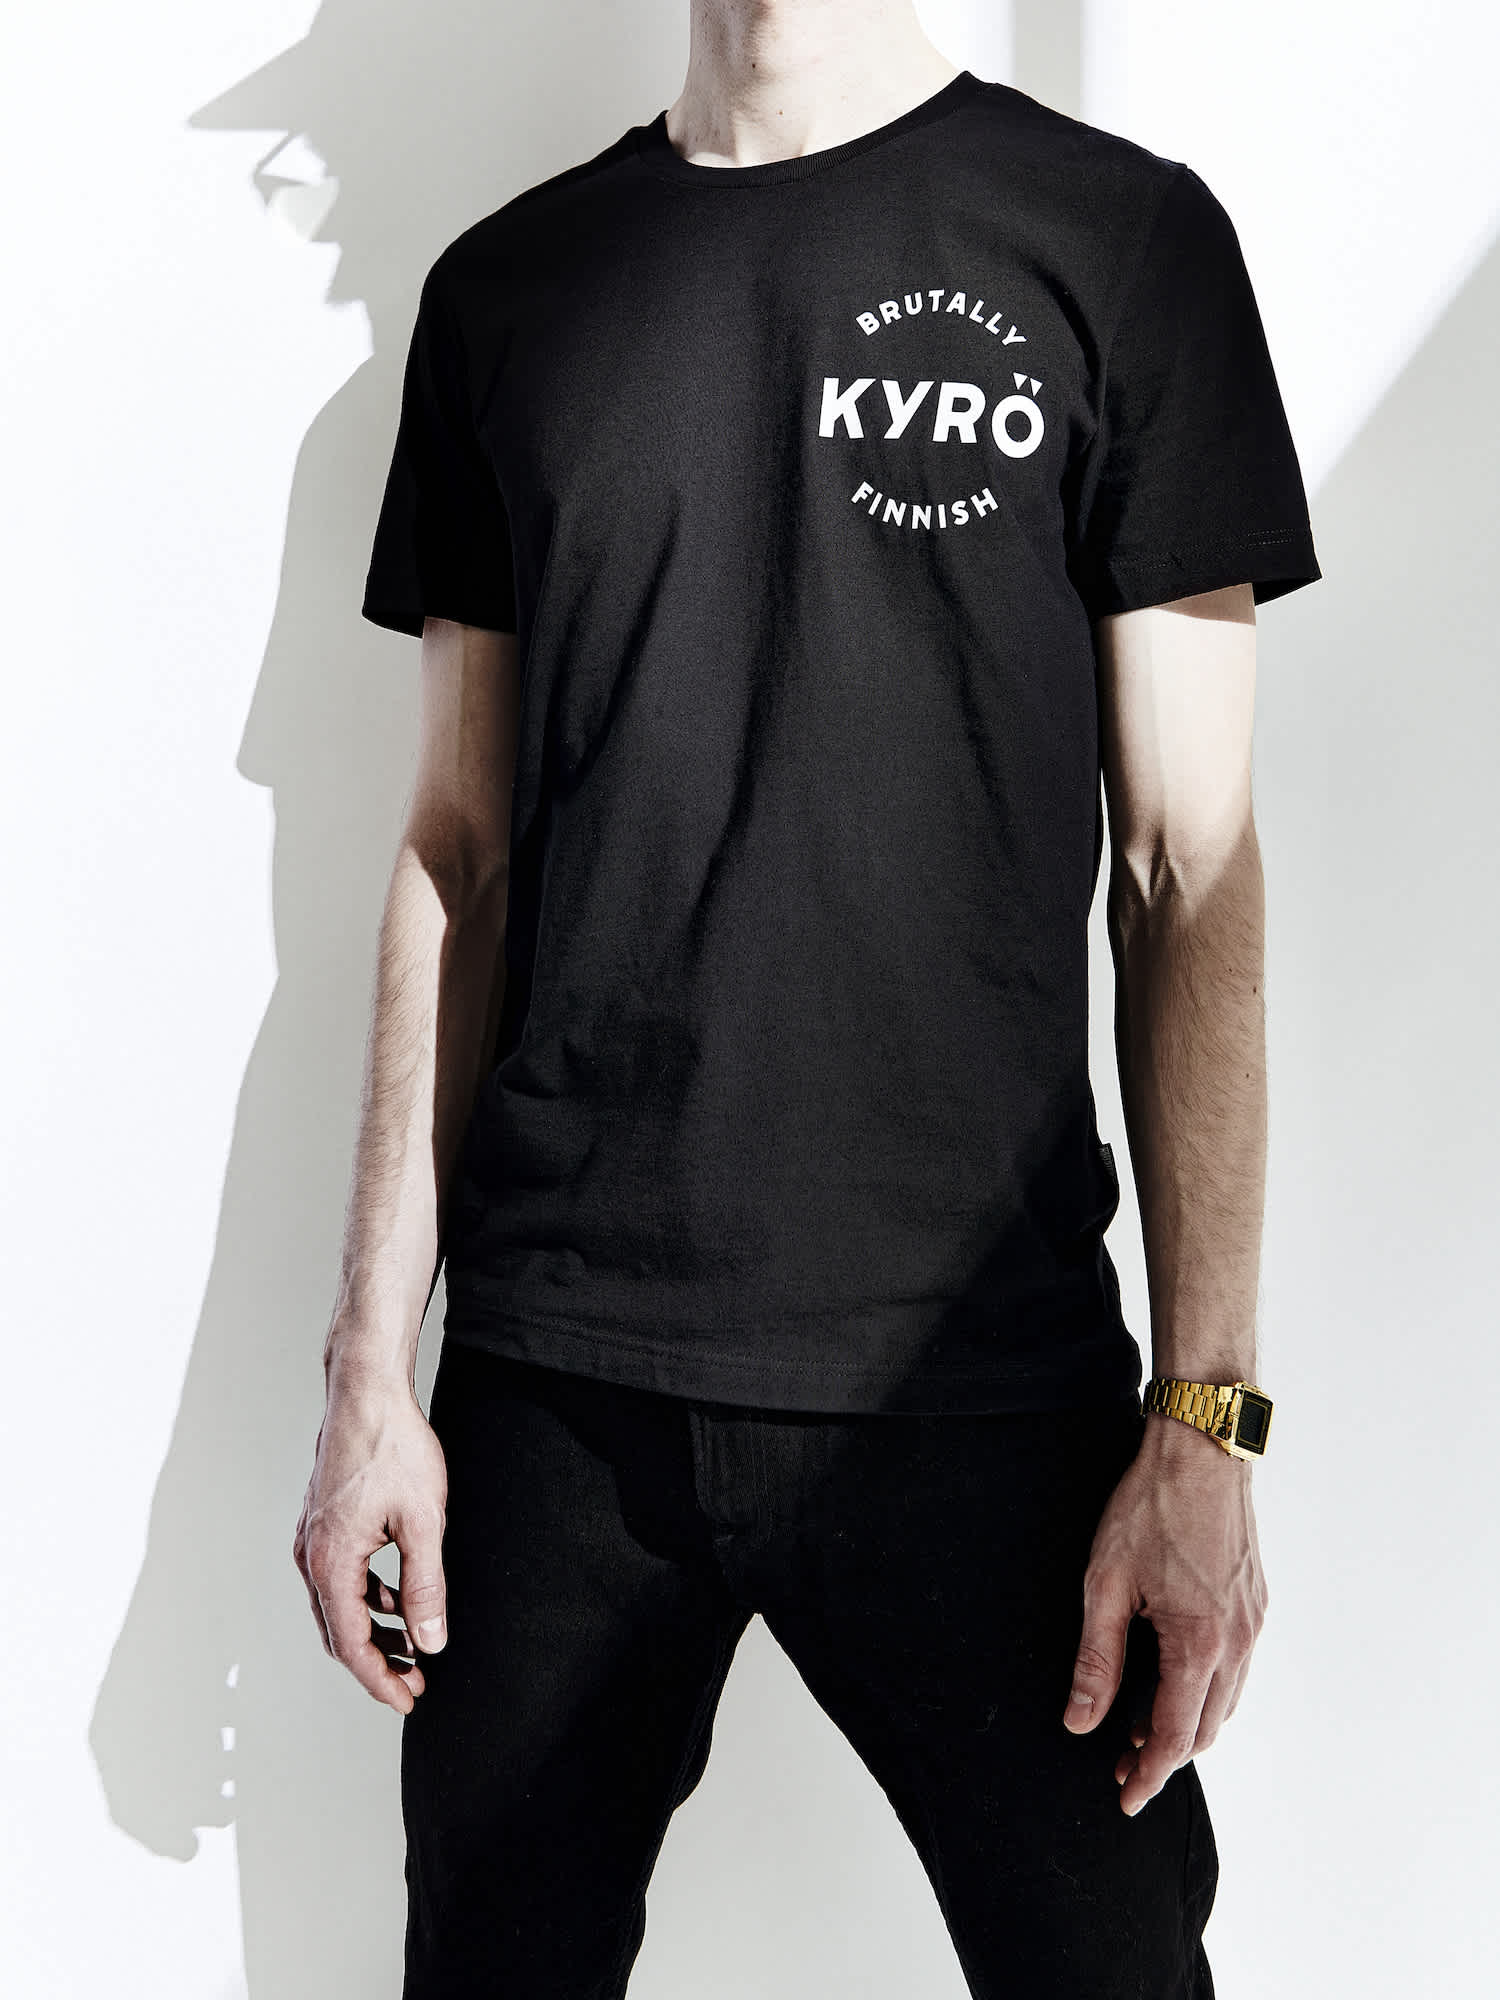 Product photo: black t-shirt with a white Kyrö logo on upper left chest. 